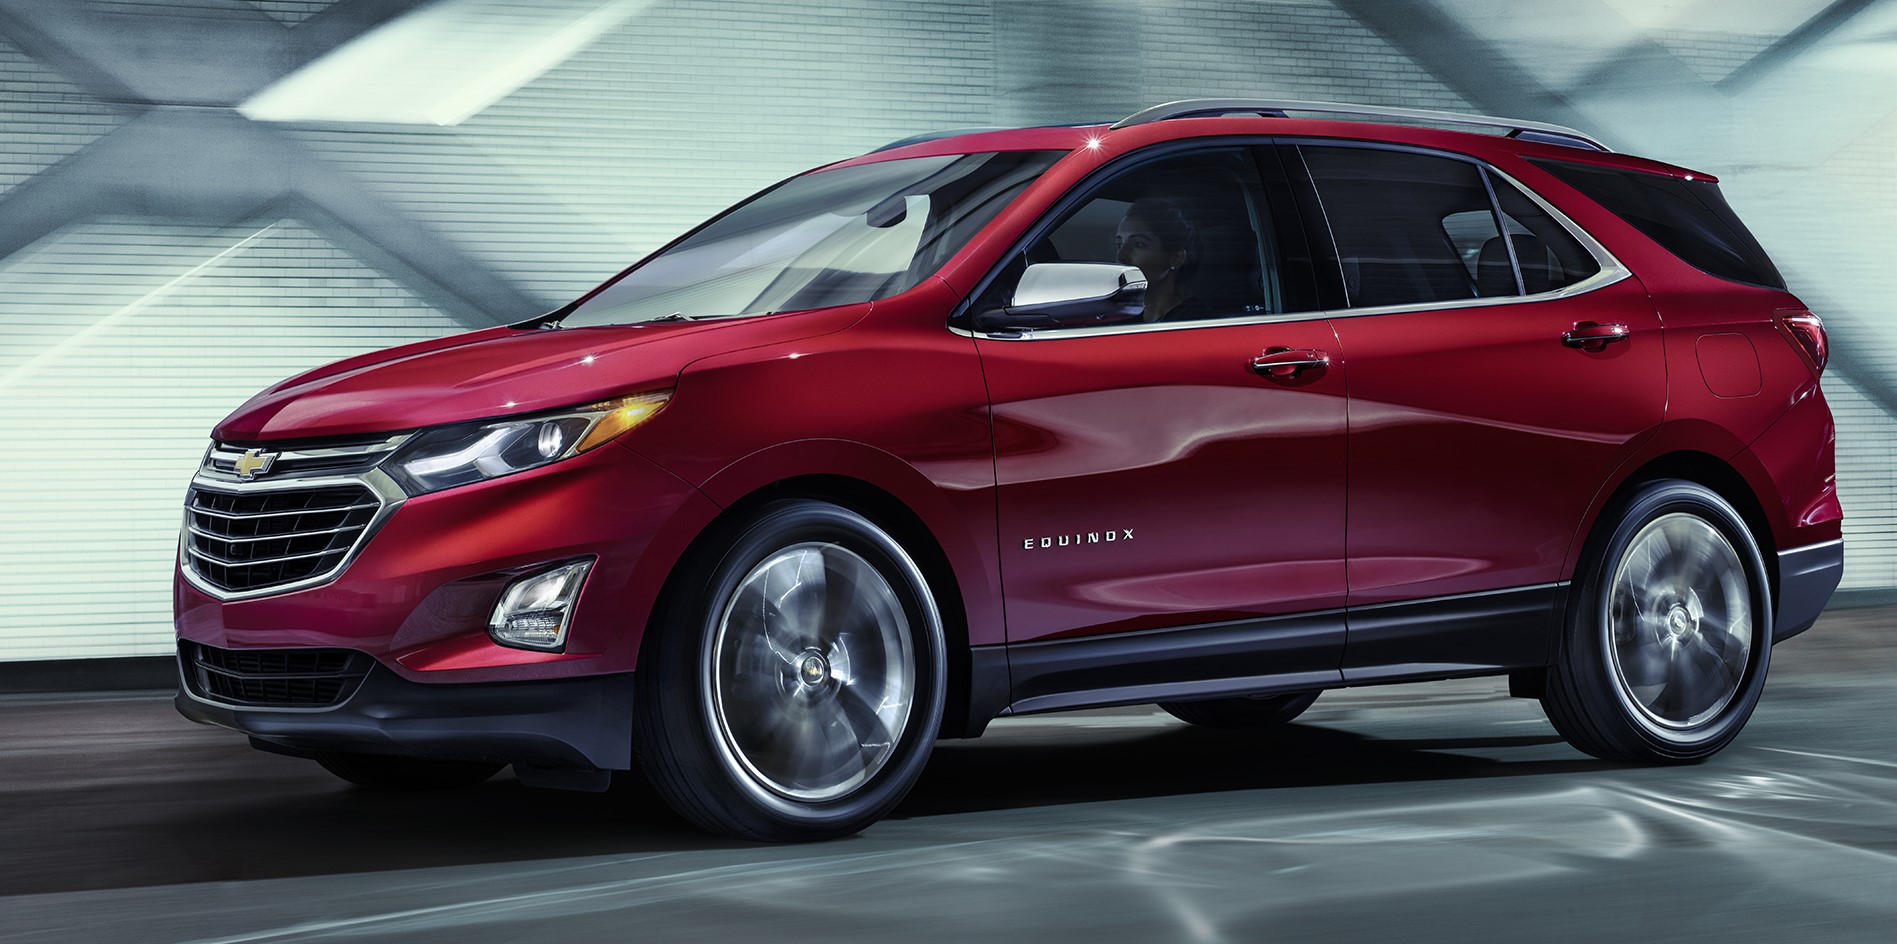 The all-new 2018 Chevrolet Equinox is a fresh and modern SUV sized and designed to meet the needs of the compact SUV customer. Its expressive exterior has an all-new, athletic look echoing the global Chevrolet design cues seen on vehicles such as the Cruze, Bolt EV and 2017 Trax.